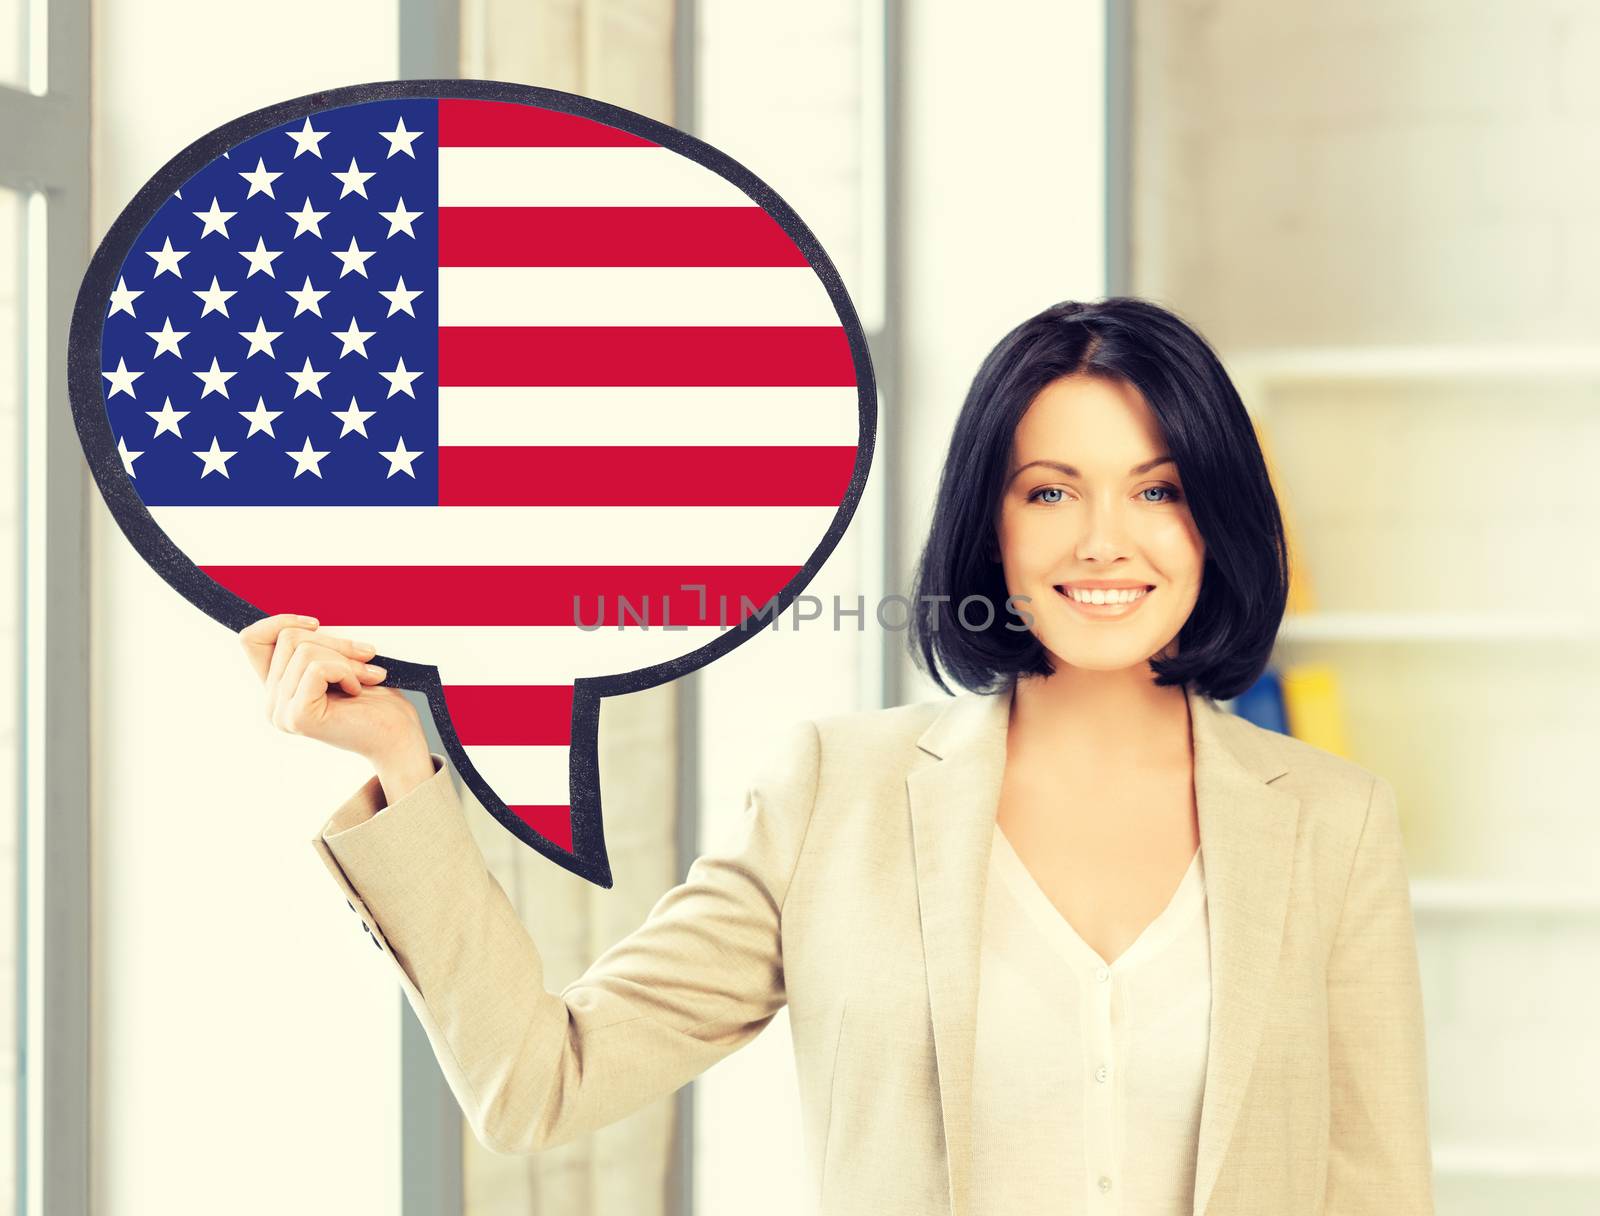 smiling woman with text bubble of american flag by dolgachov